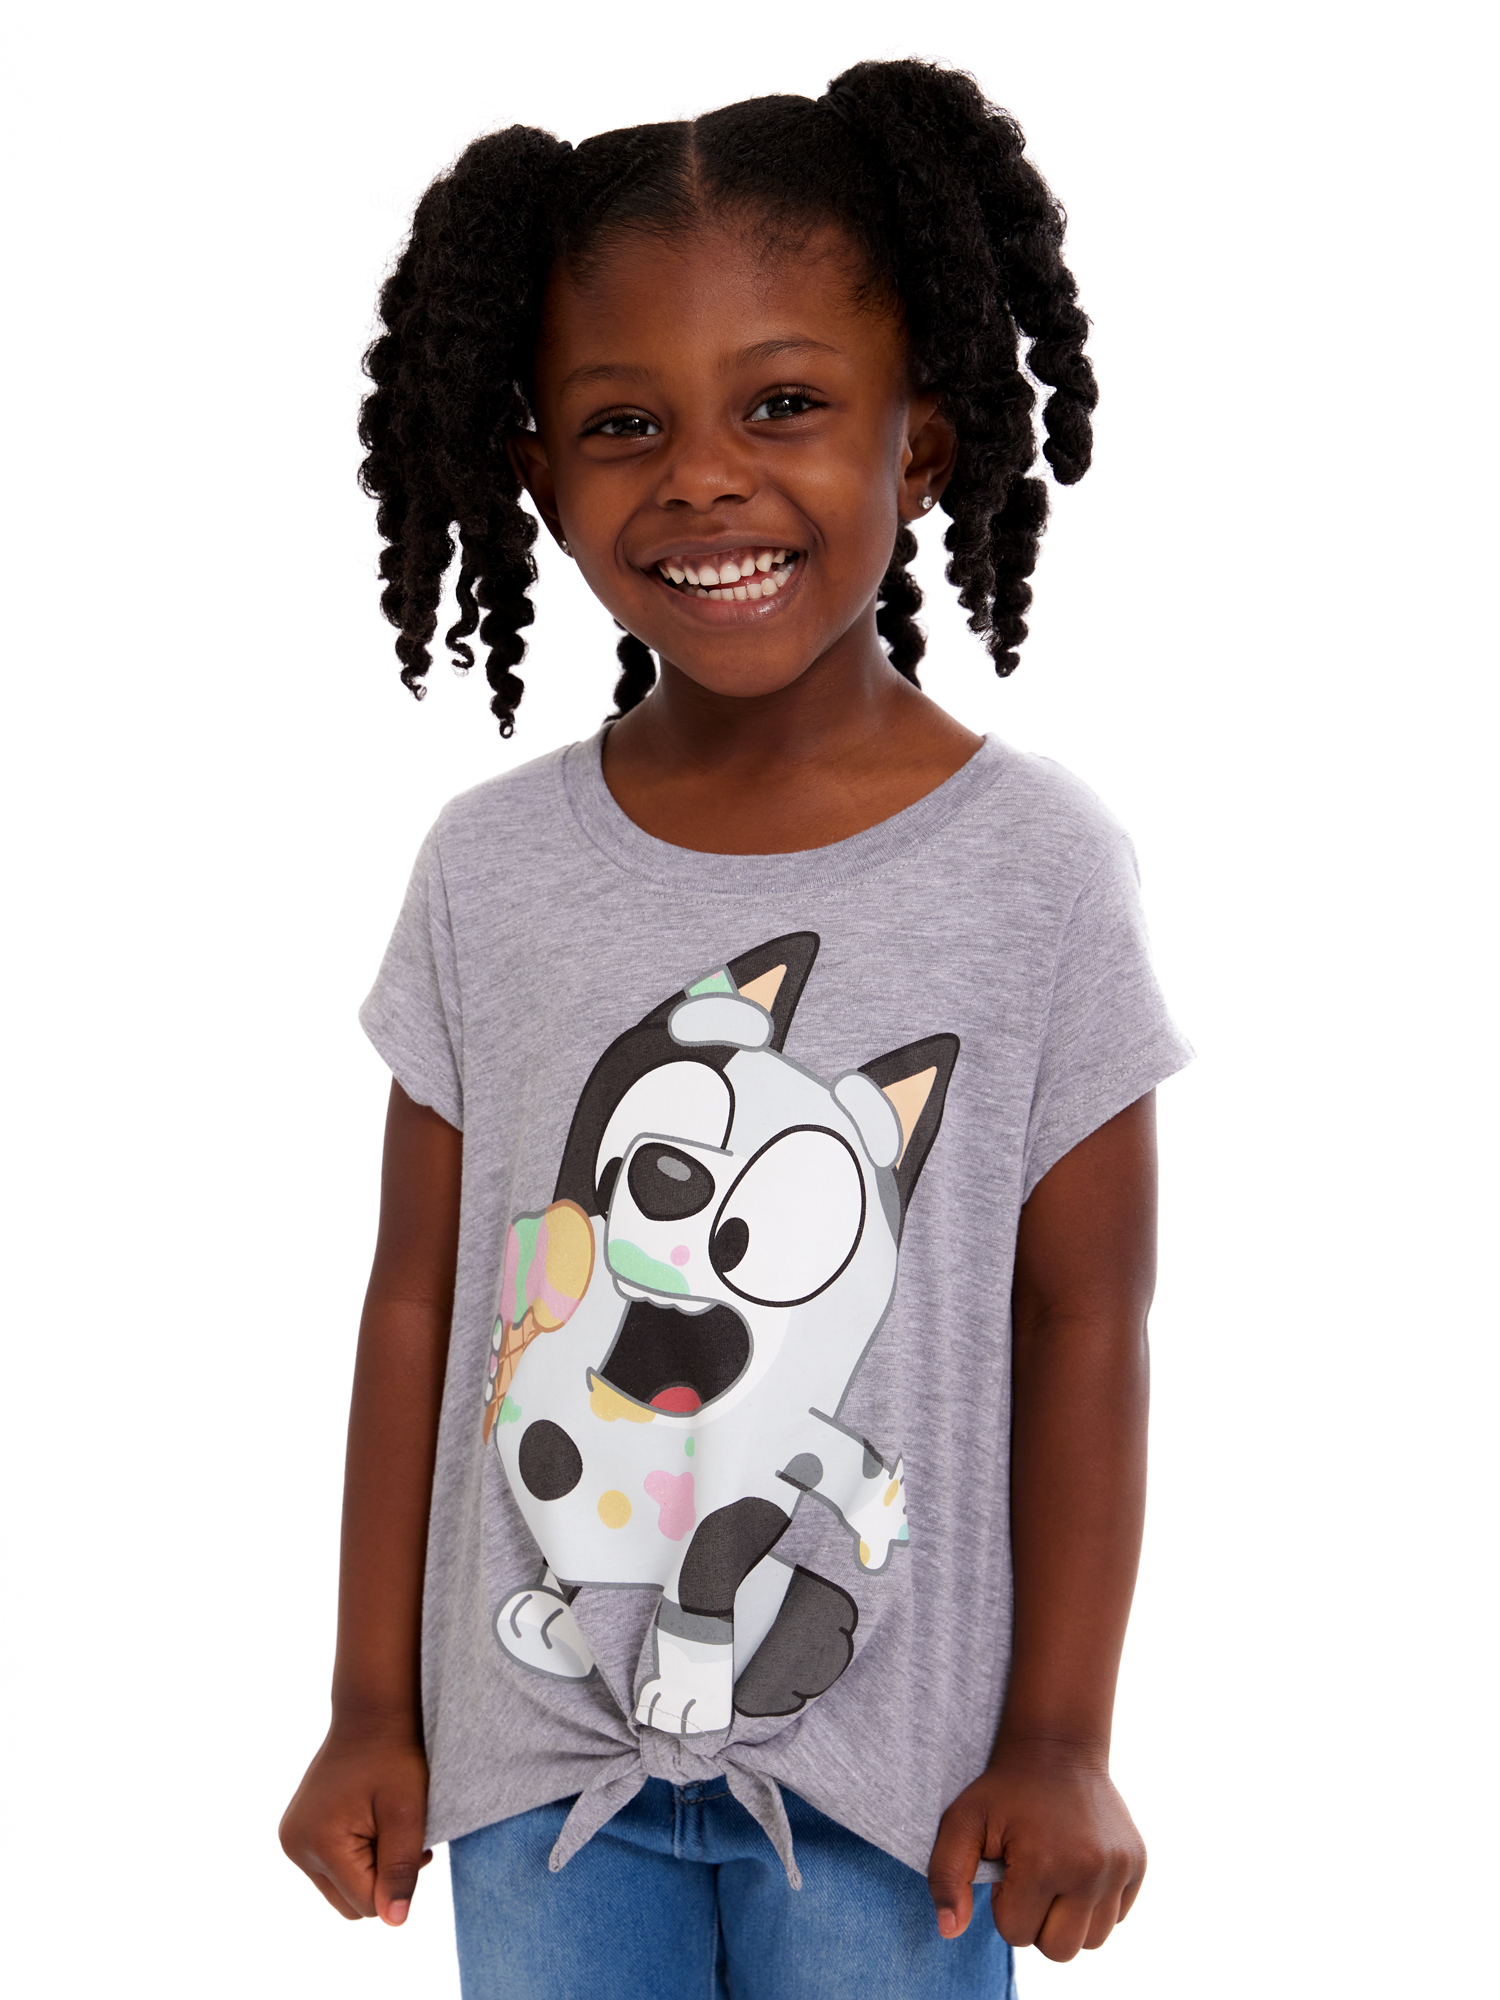 Bluey Toddler Girl Graphic Print Fashion T-Shirts, 4-Pack, Sizes 2T-5T - image 4 of 14